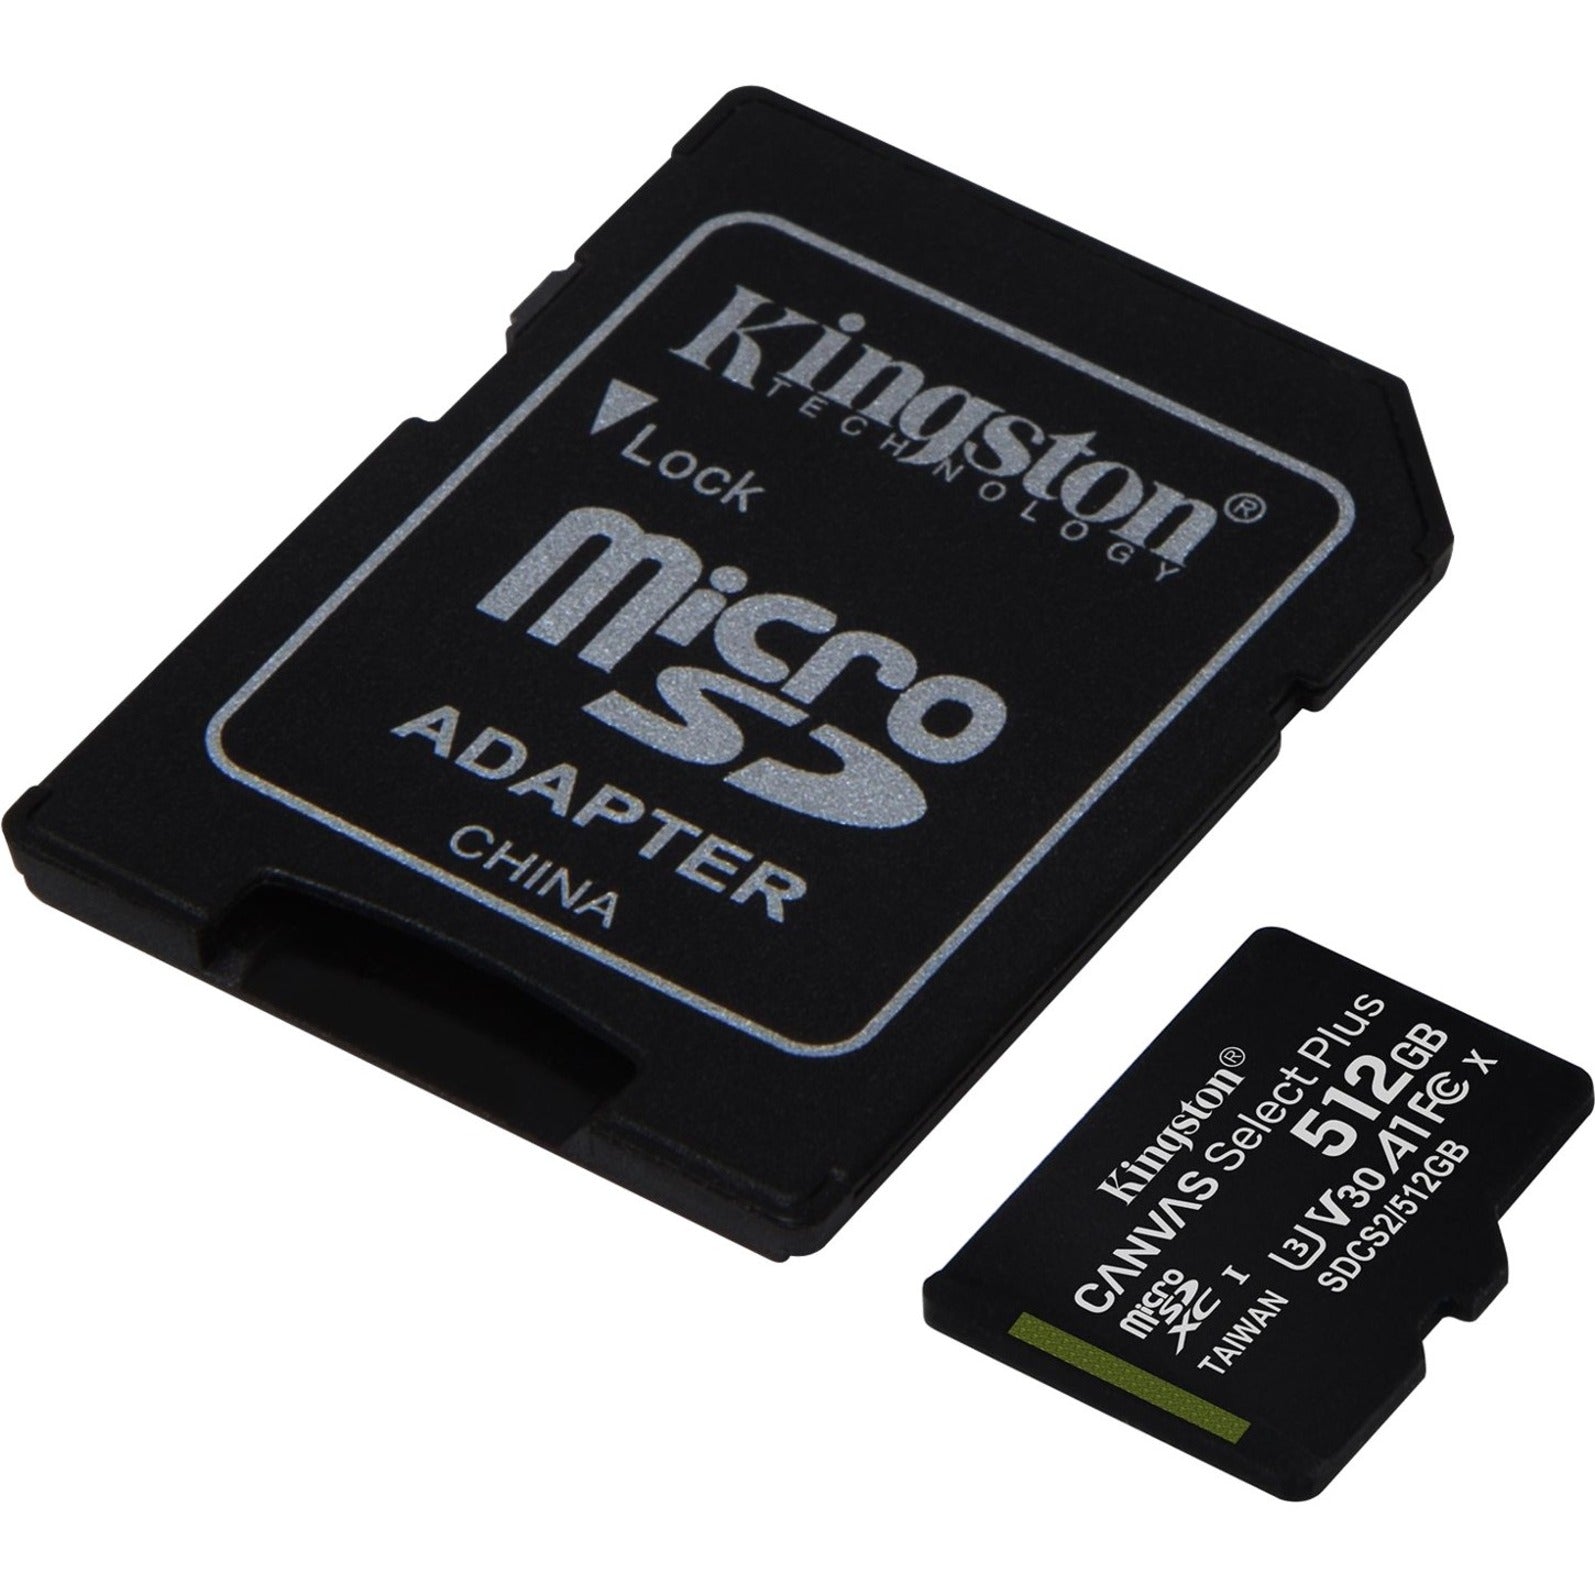 Kingston SDCS2/512GB Canvas Select Plus microSD Card With Android A1 Performance Class, 512GB